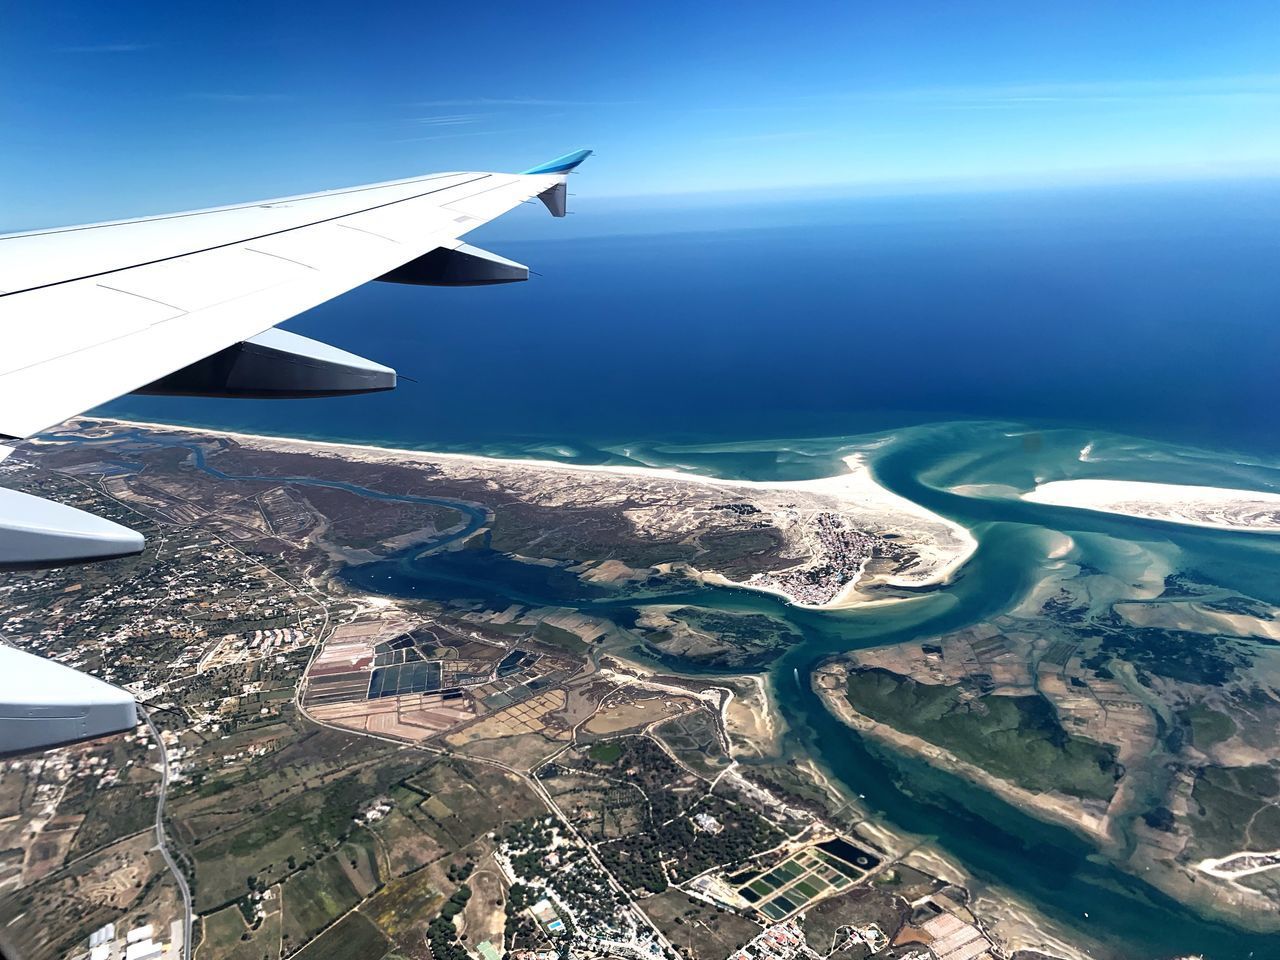 AERIAL VIEW OF SEA AND AIRPLANE WING AGAINST SKY